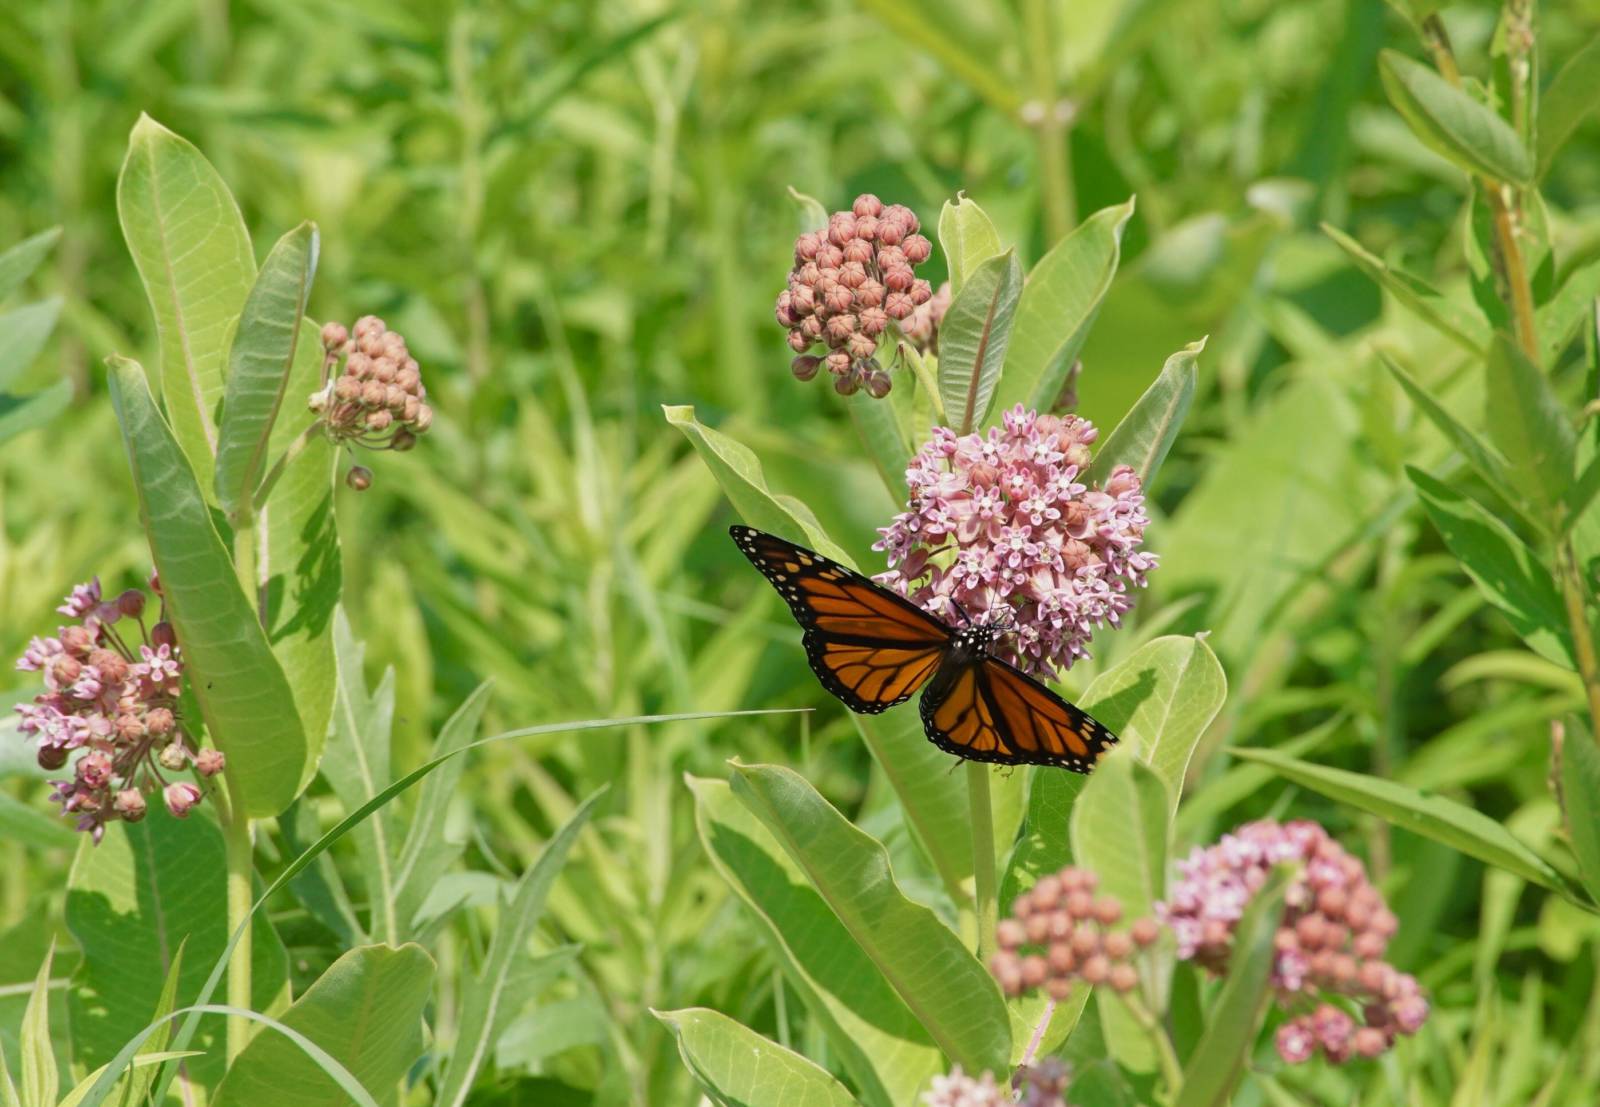 Milkweed attracting a Monarch Butterfly at Riveredge Nature Center